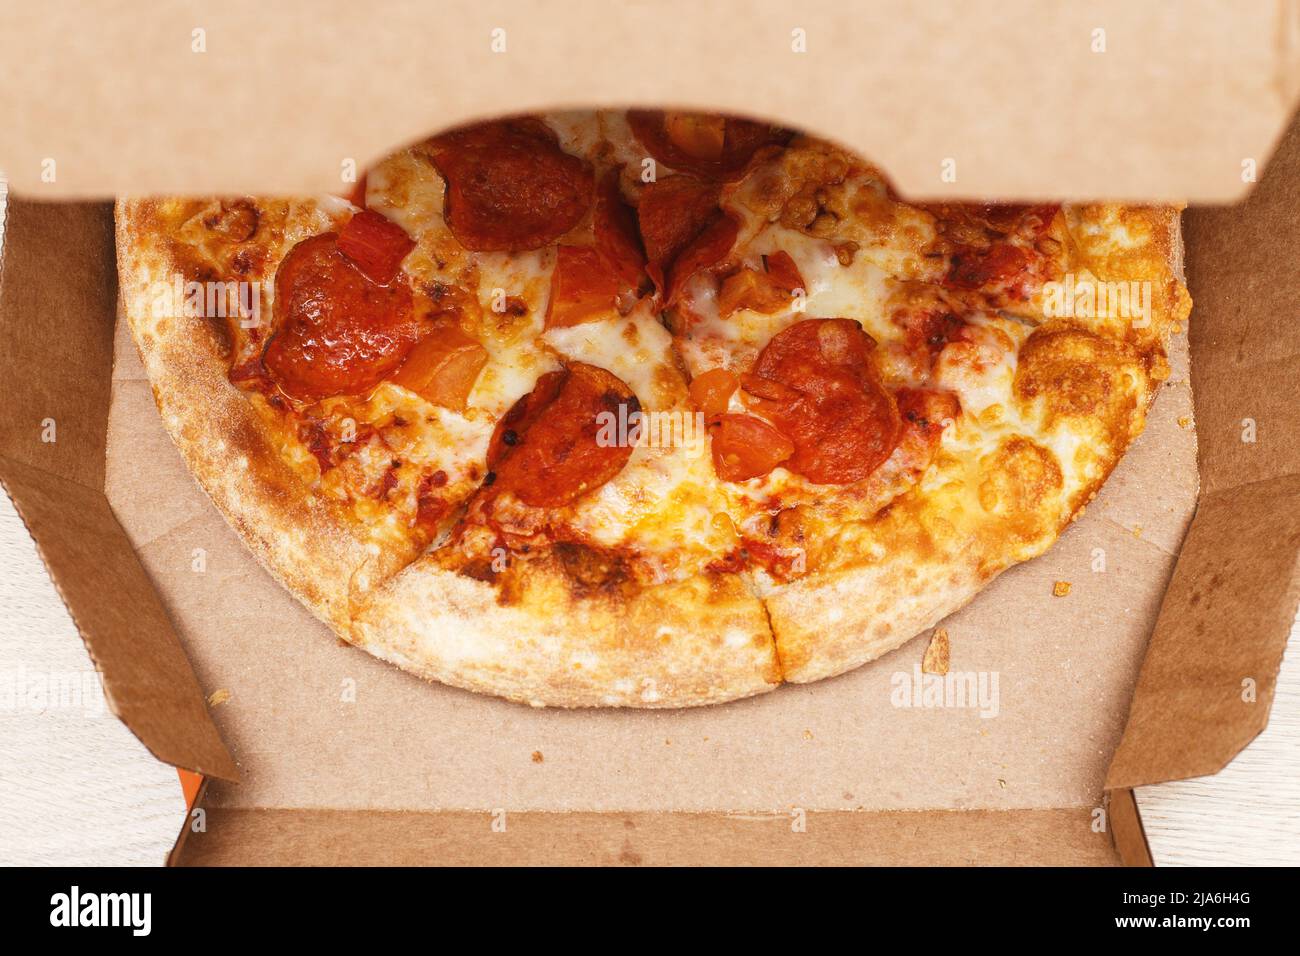 Fresh Hot Pizza In A Pizza Box Stock Photo - Download Image Now